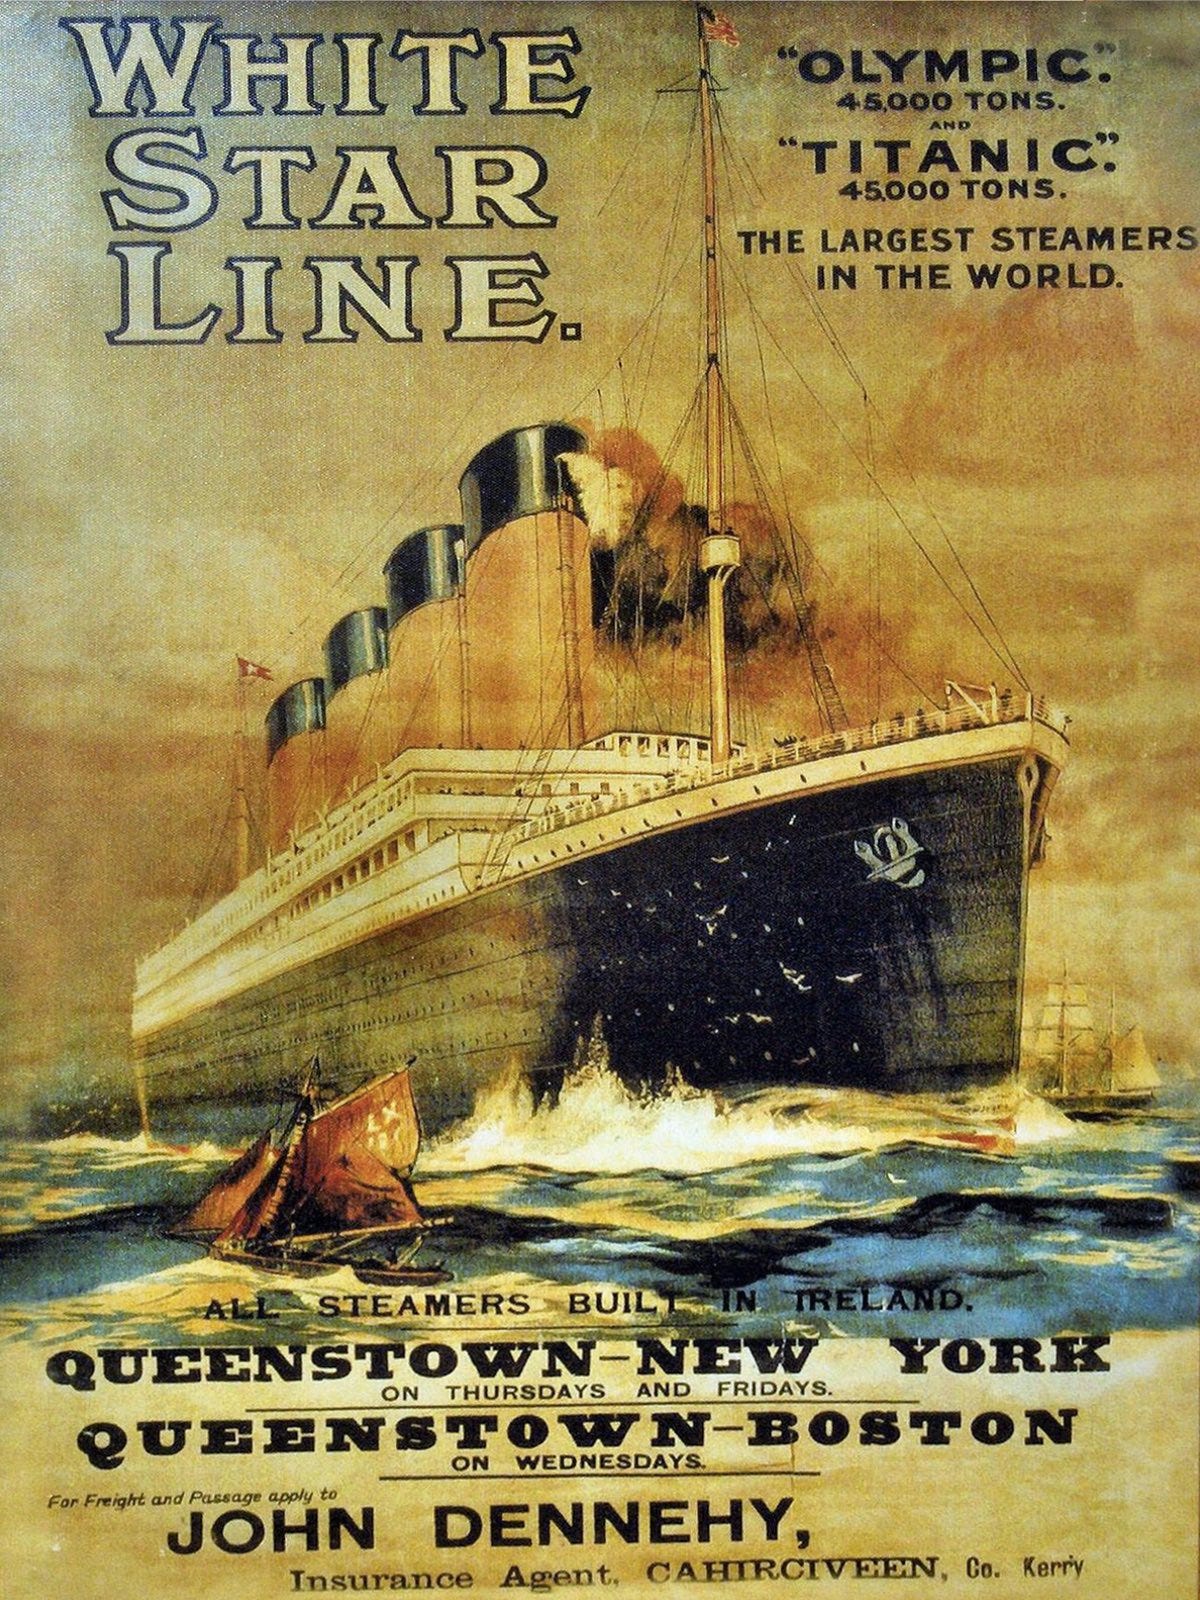 The White Star line would have ruined its reputation if their flagship was sunk